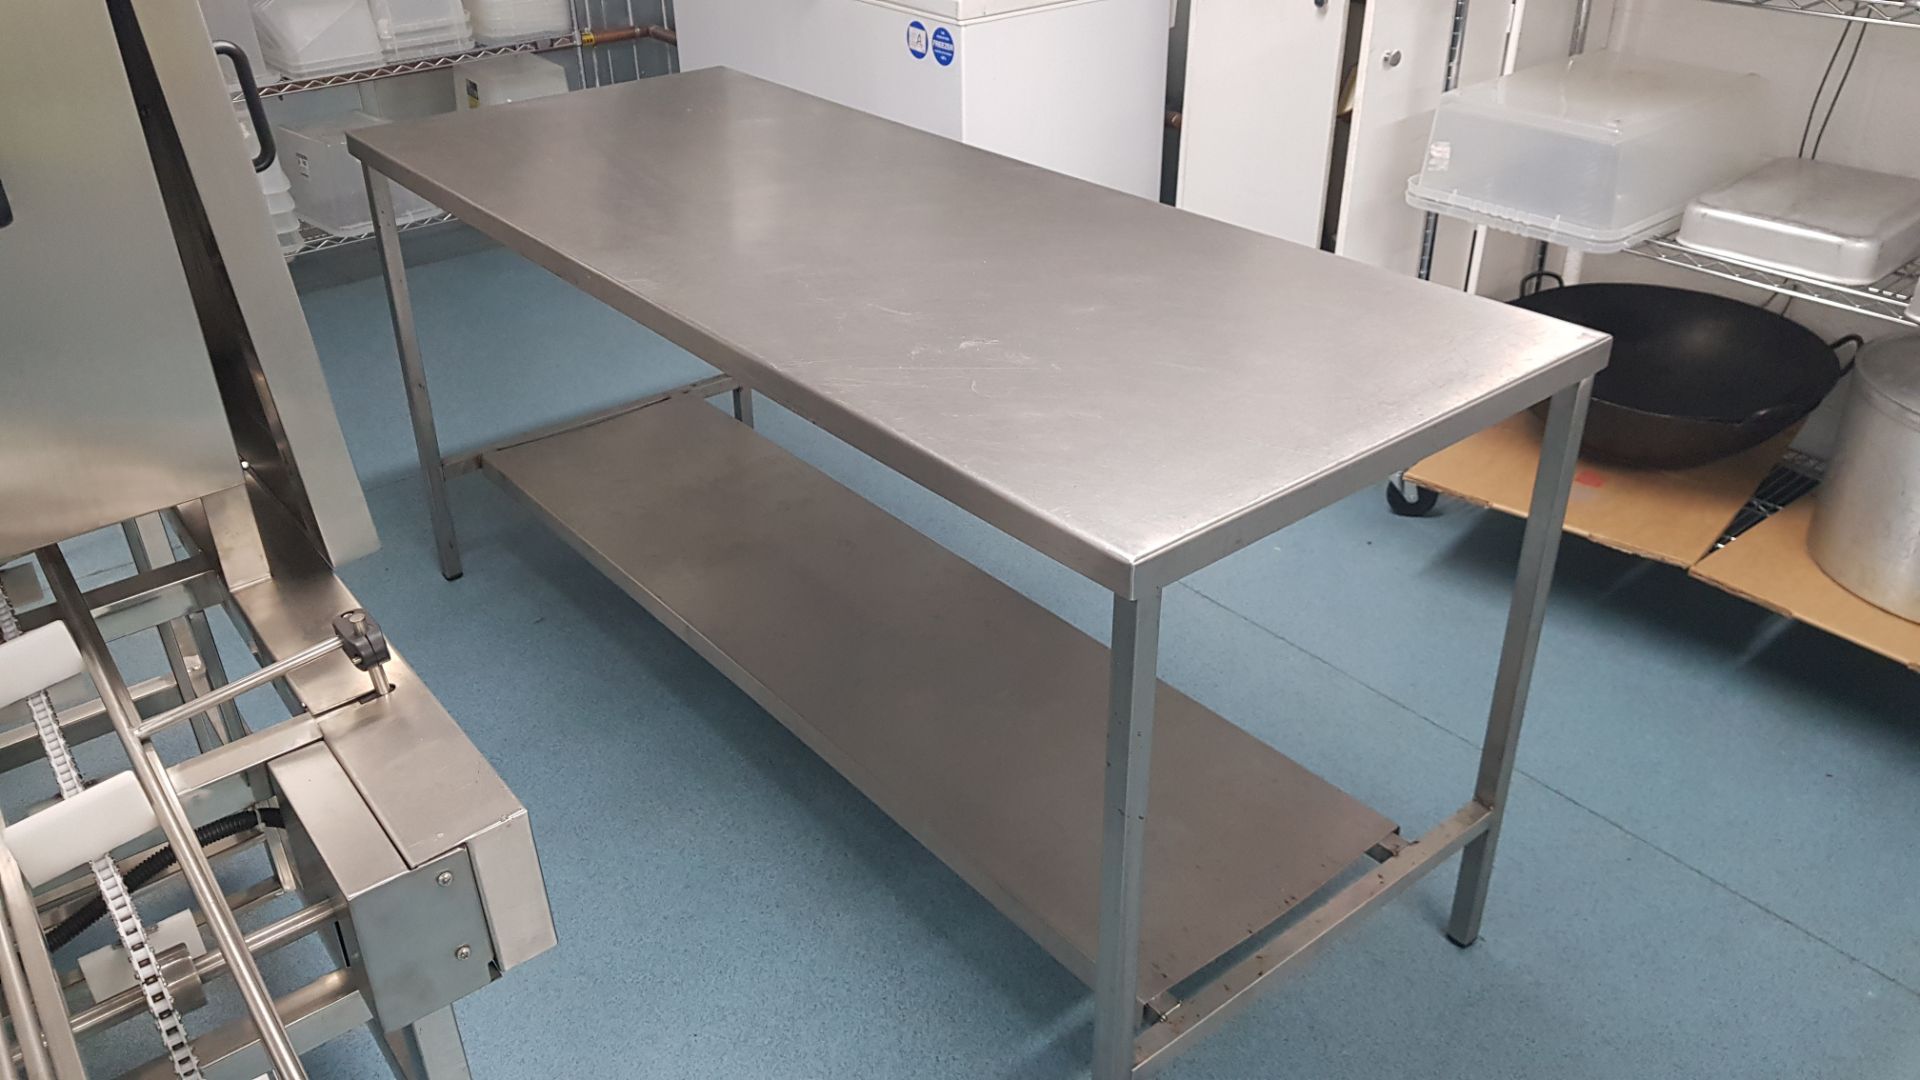 1 X STAINLESS STEEL PREP TABLE (70 X 180CM)